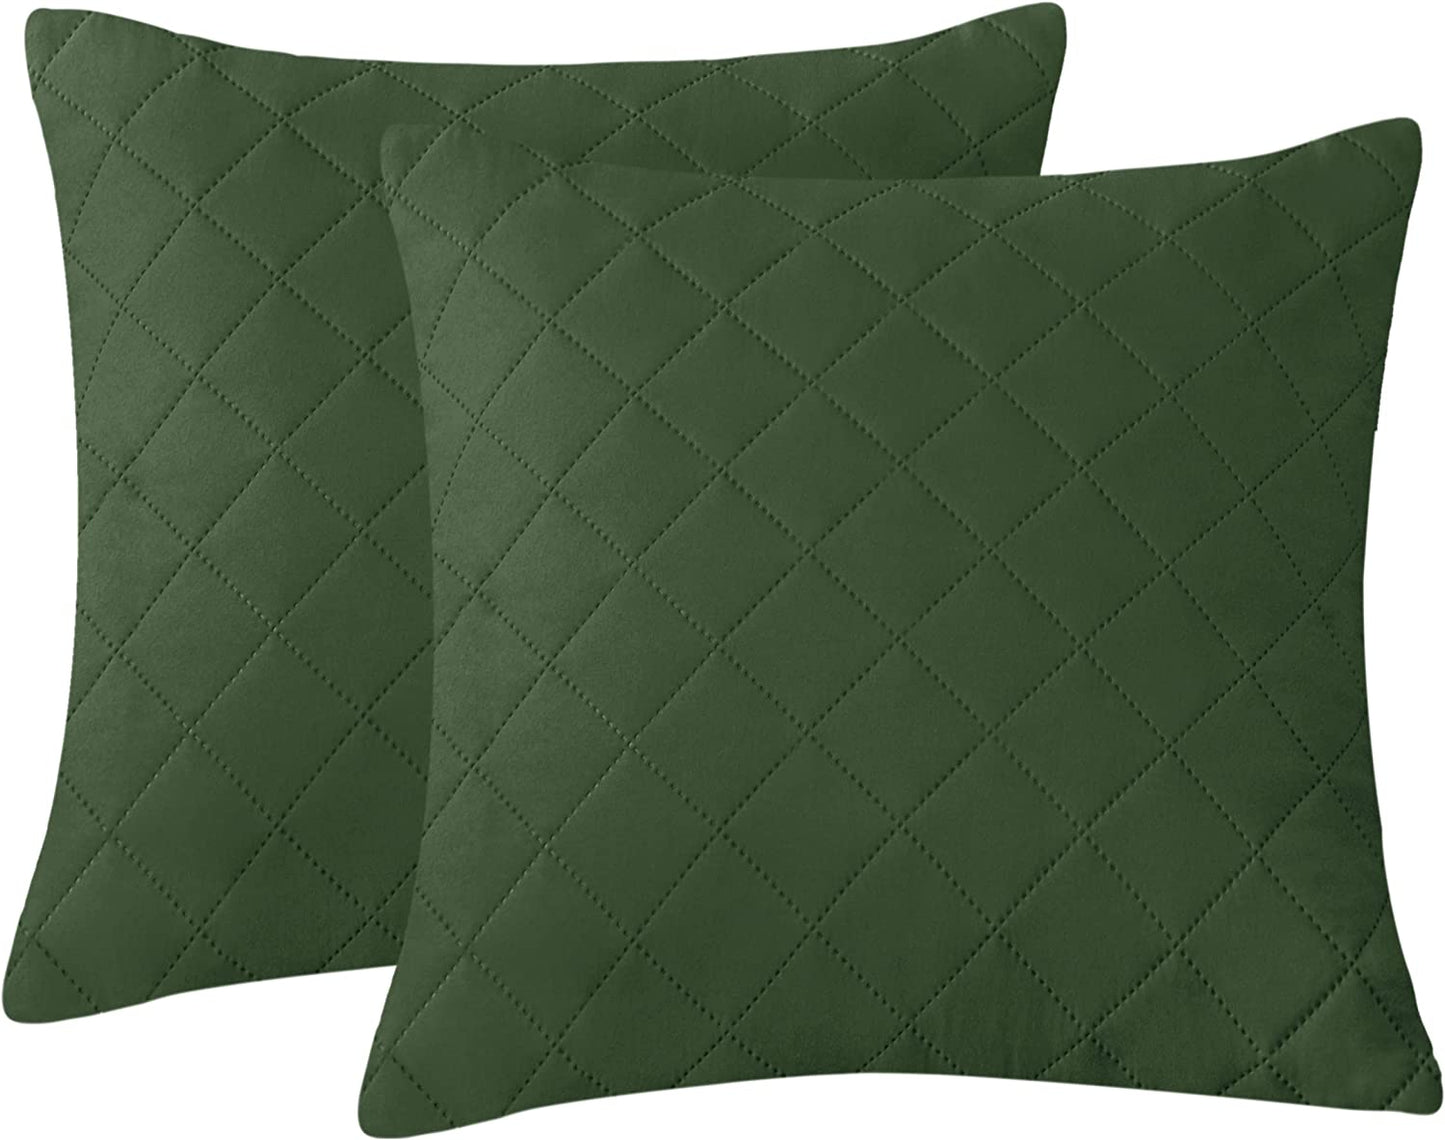 Quilted Cushion Cover Square Pattren 16"x16"Green